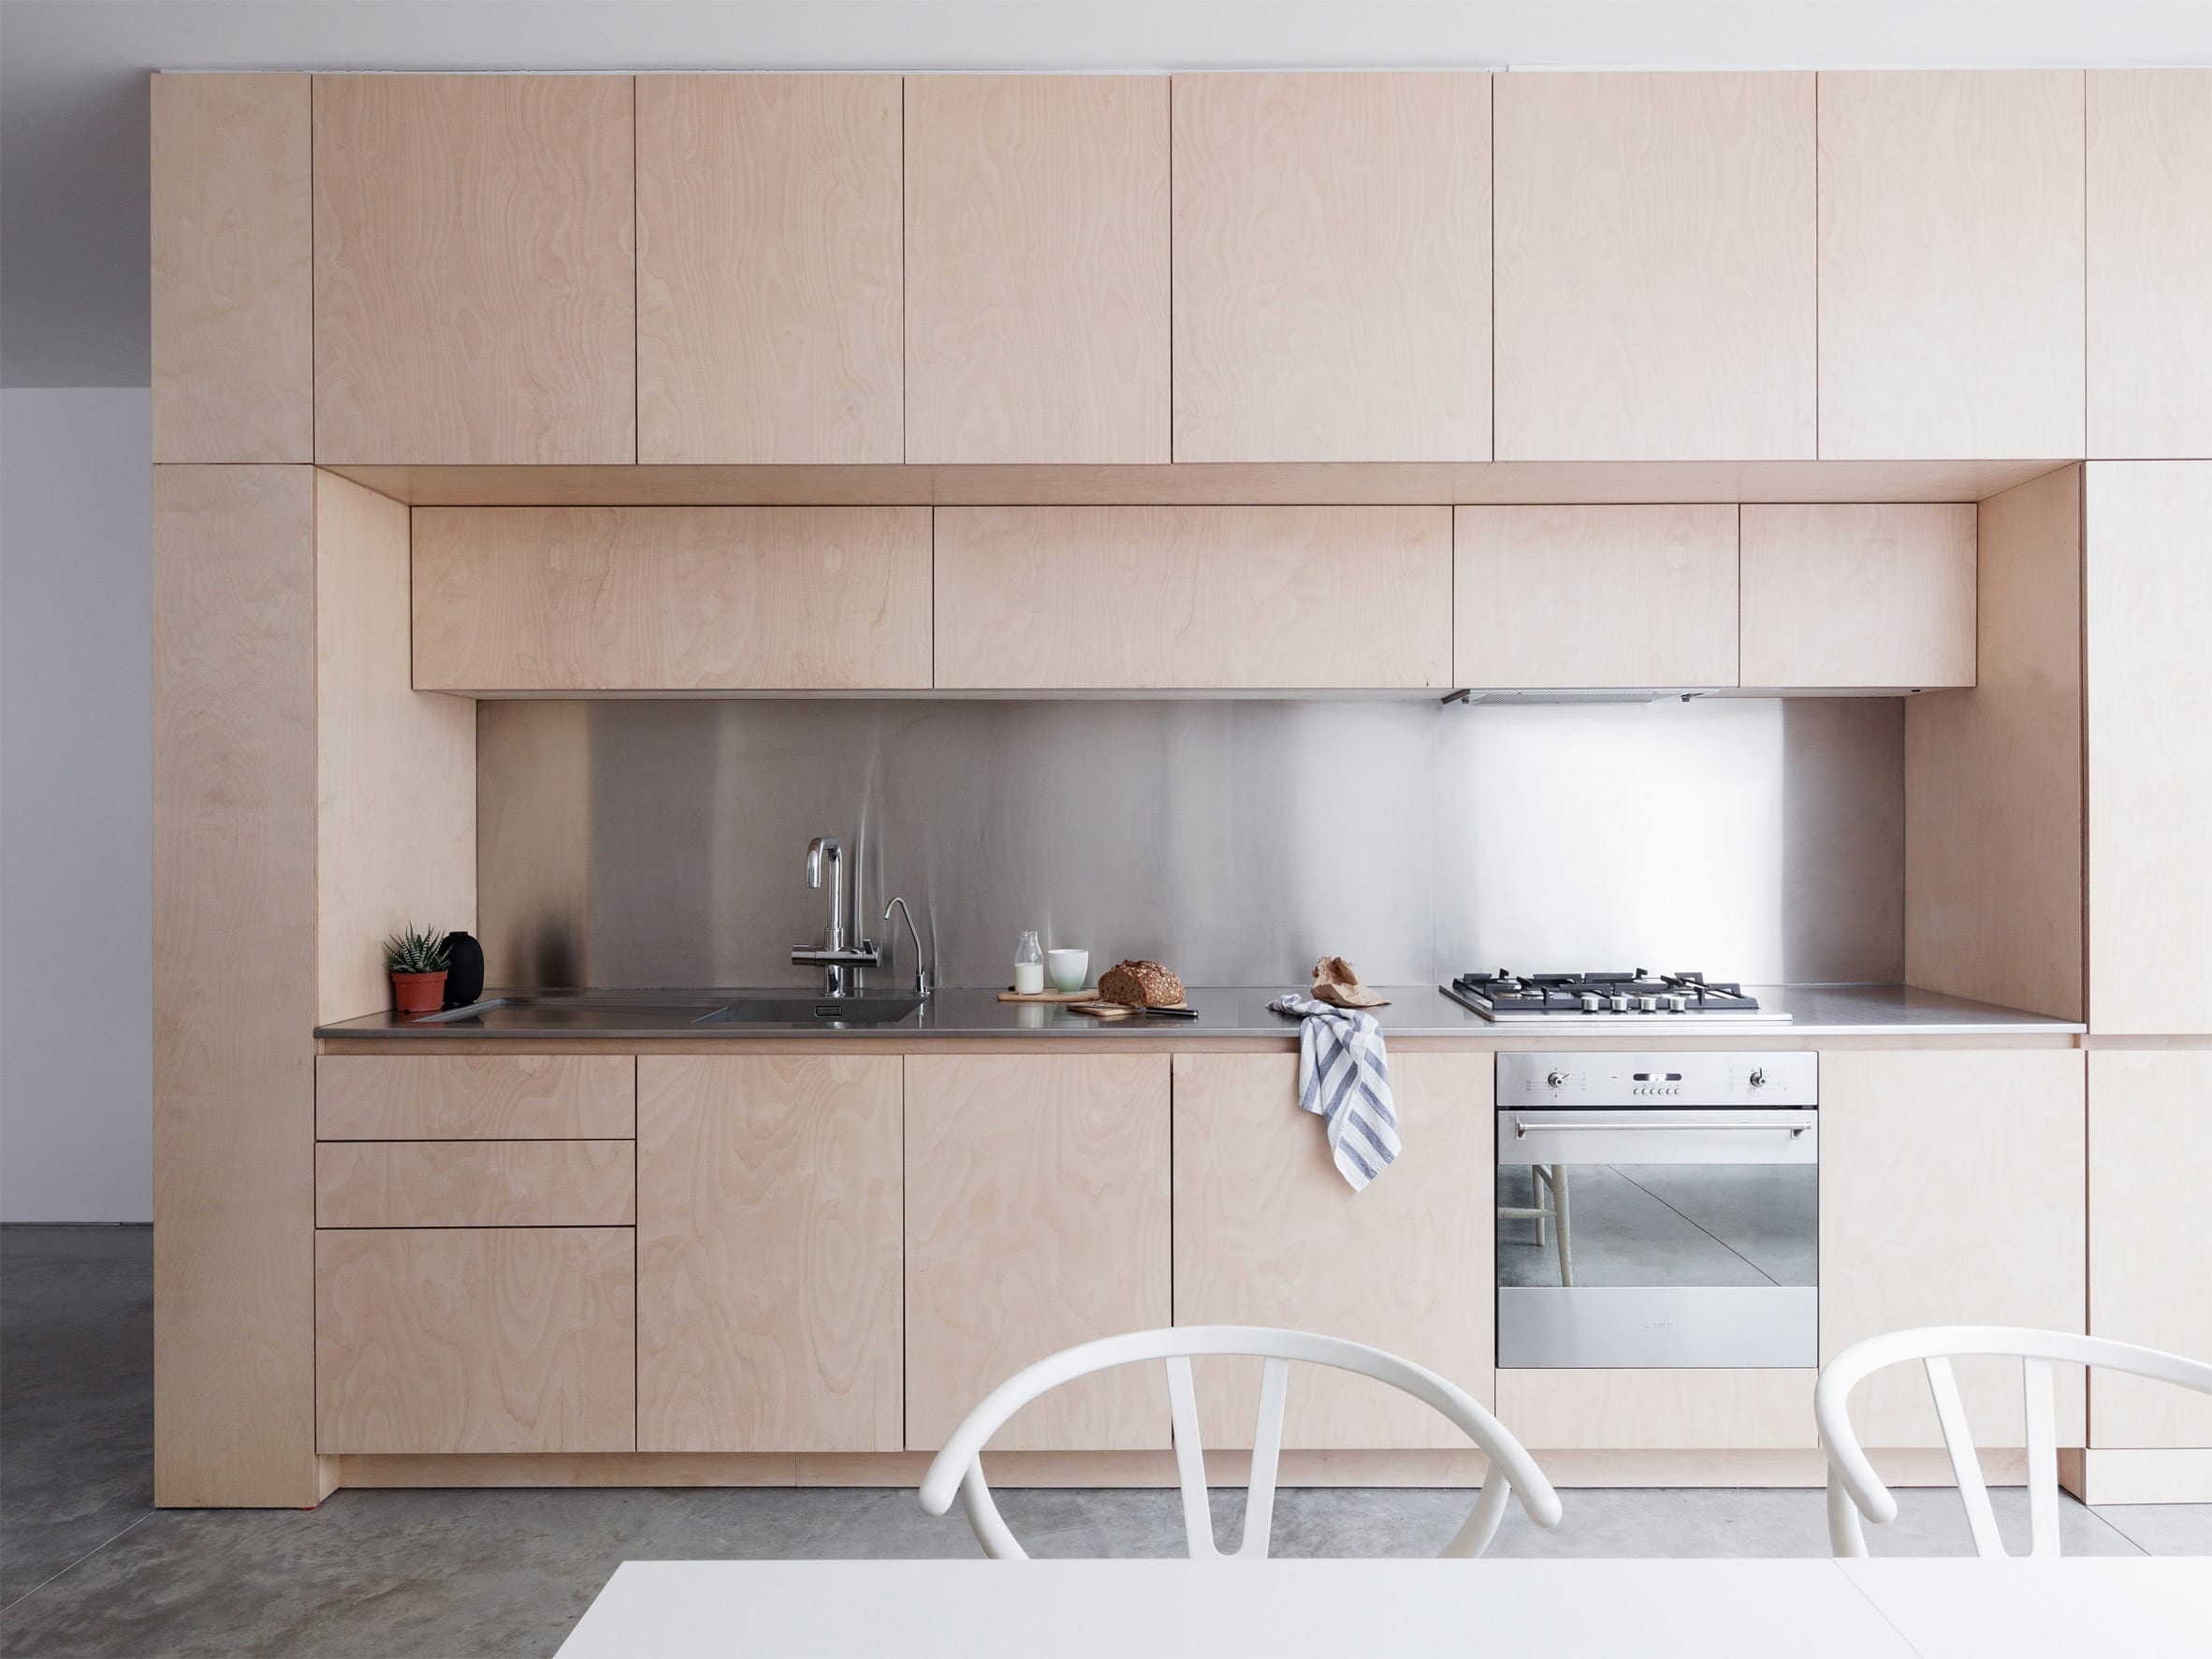 Larissa Johnston built the one-wall kitchen within a plywood unit